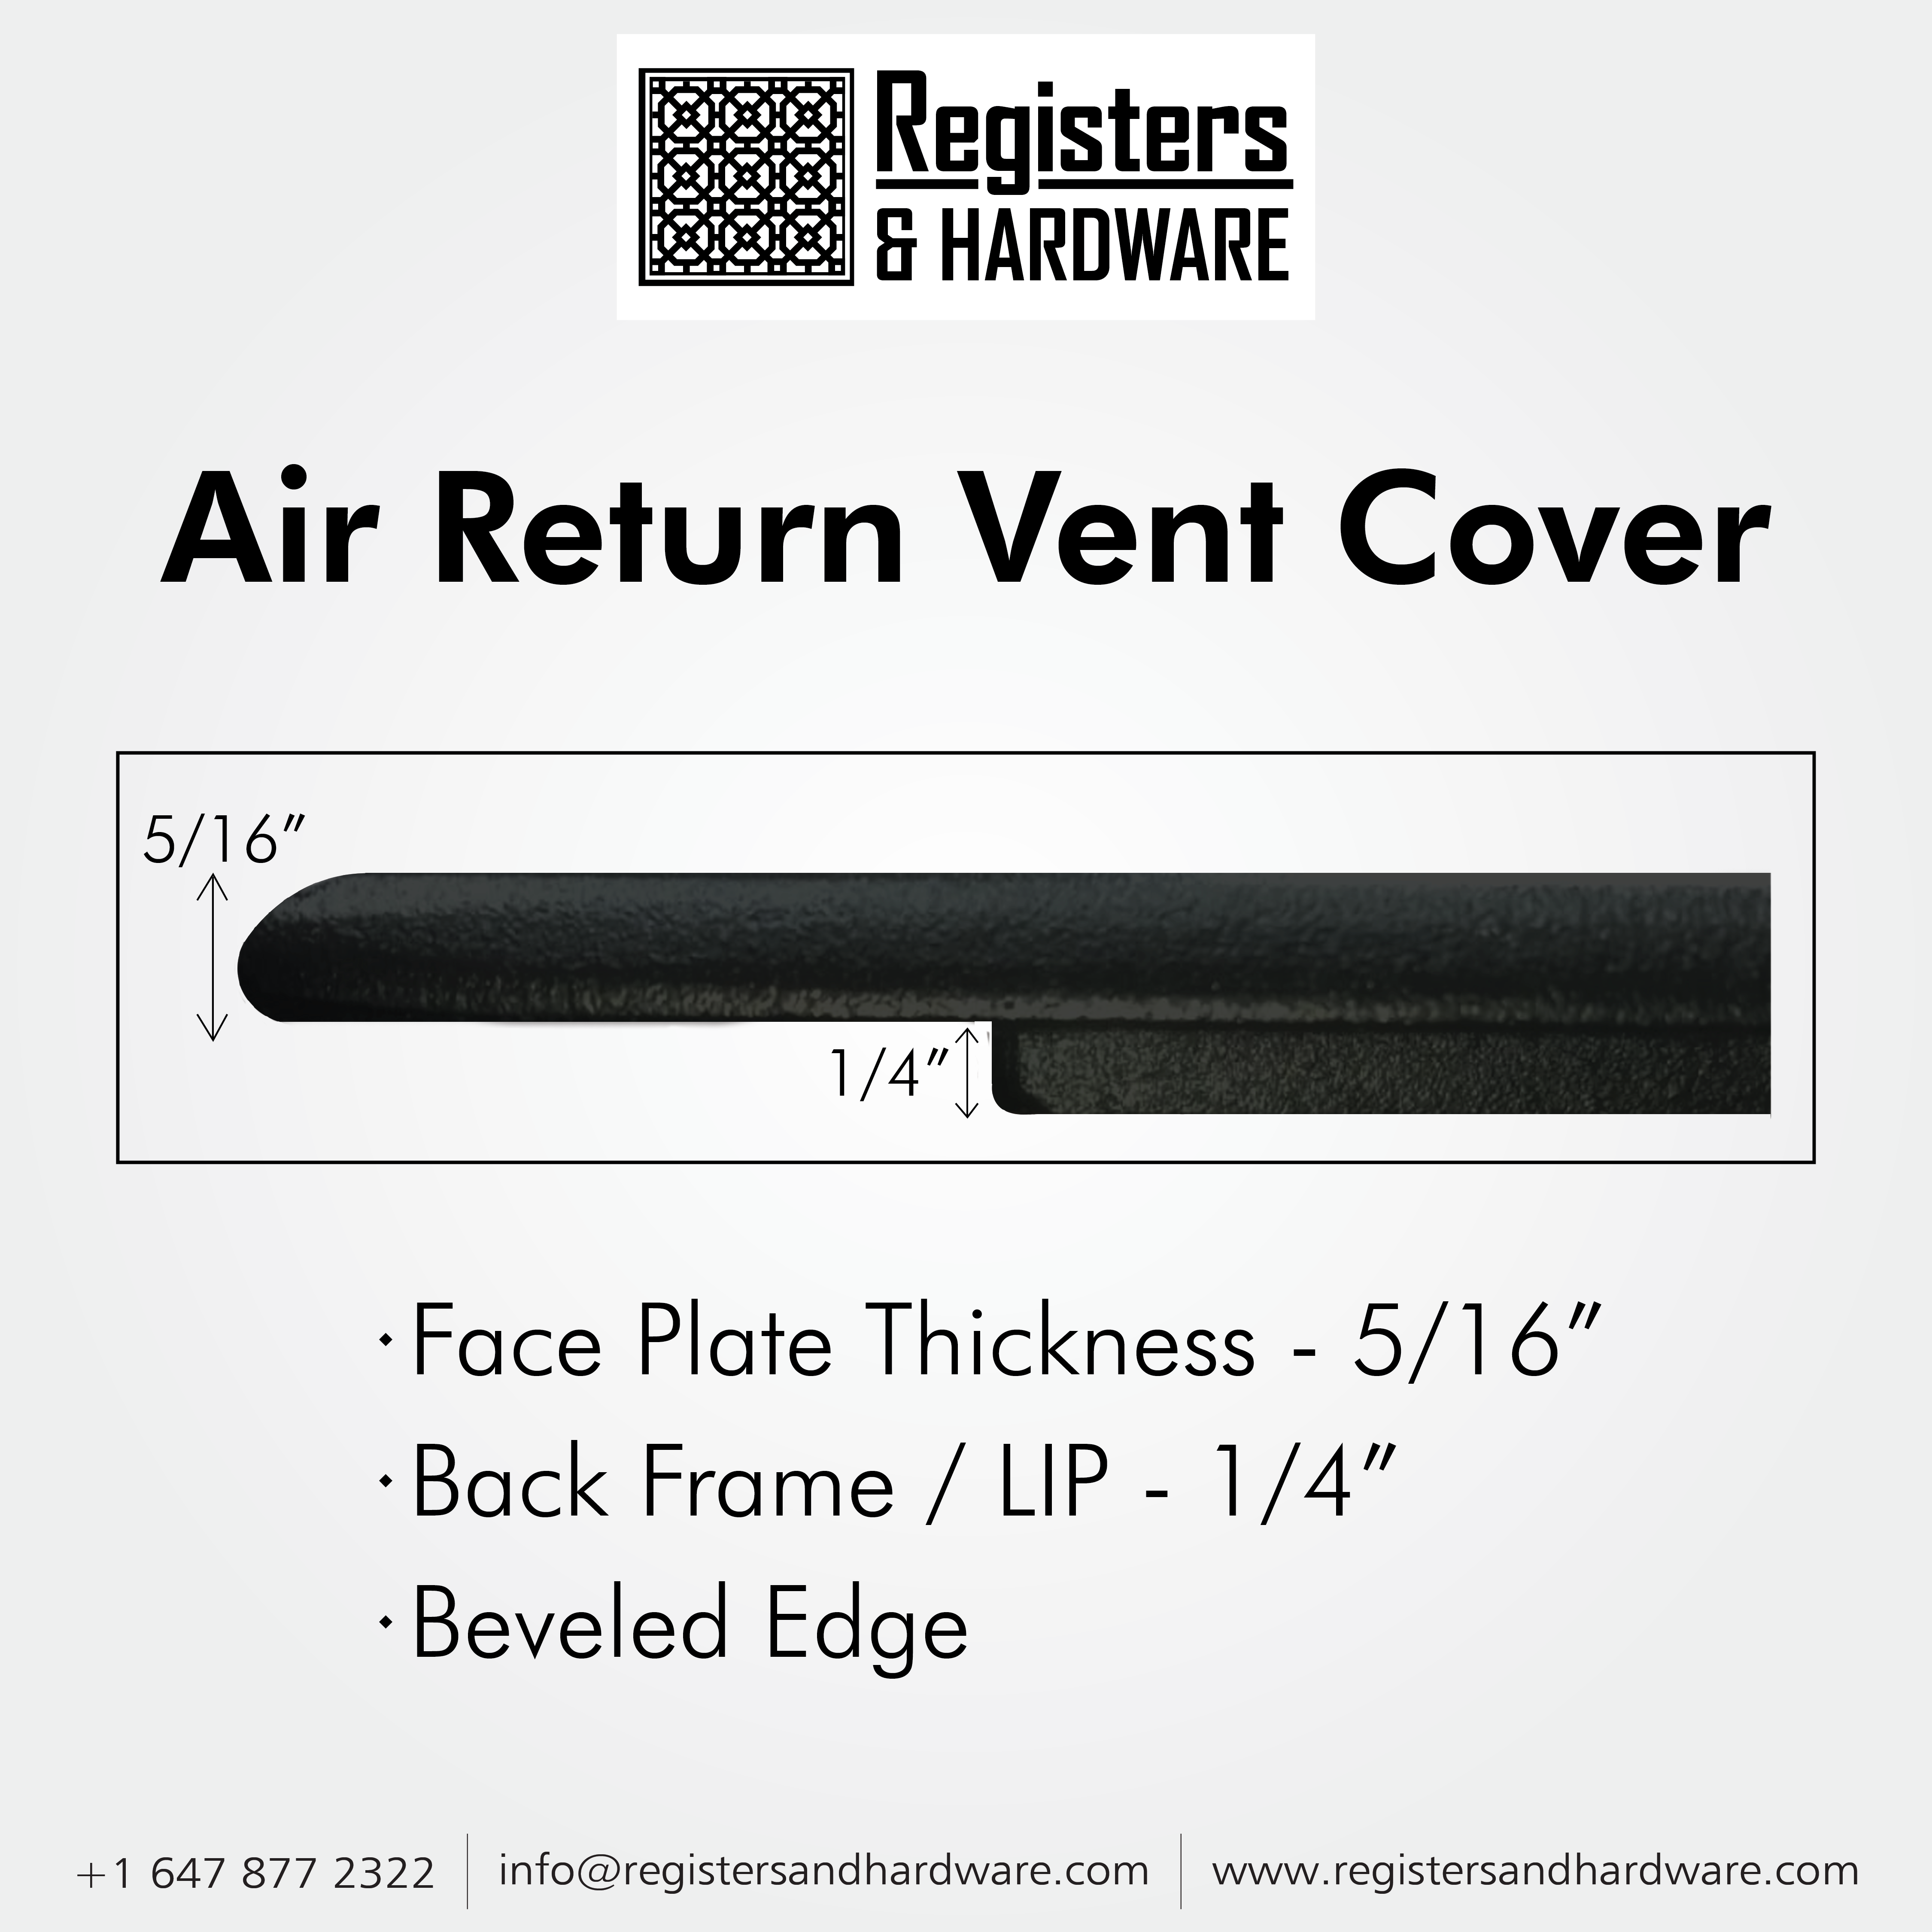 Achtek AIR RETURN 2"x14" Duct Opening (Overall Size 4"x16") | Heavy Cast Aluminum Air Grille / HVAC Duct Cover || Powder Coated